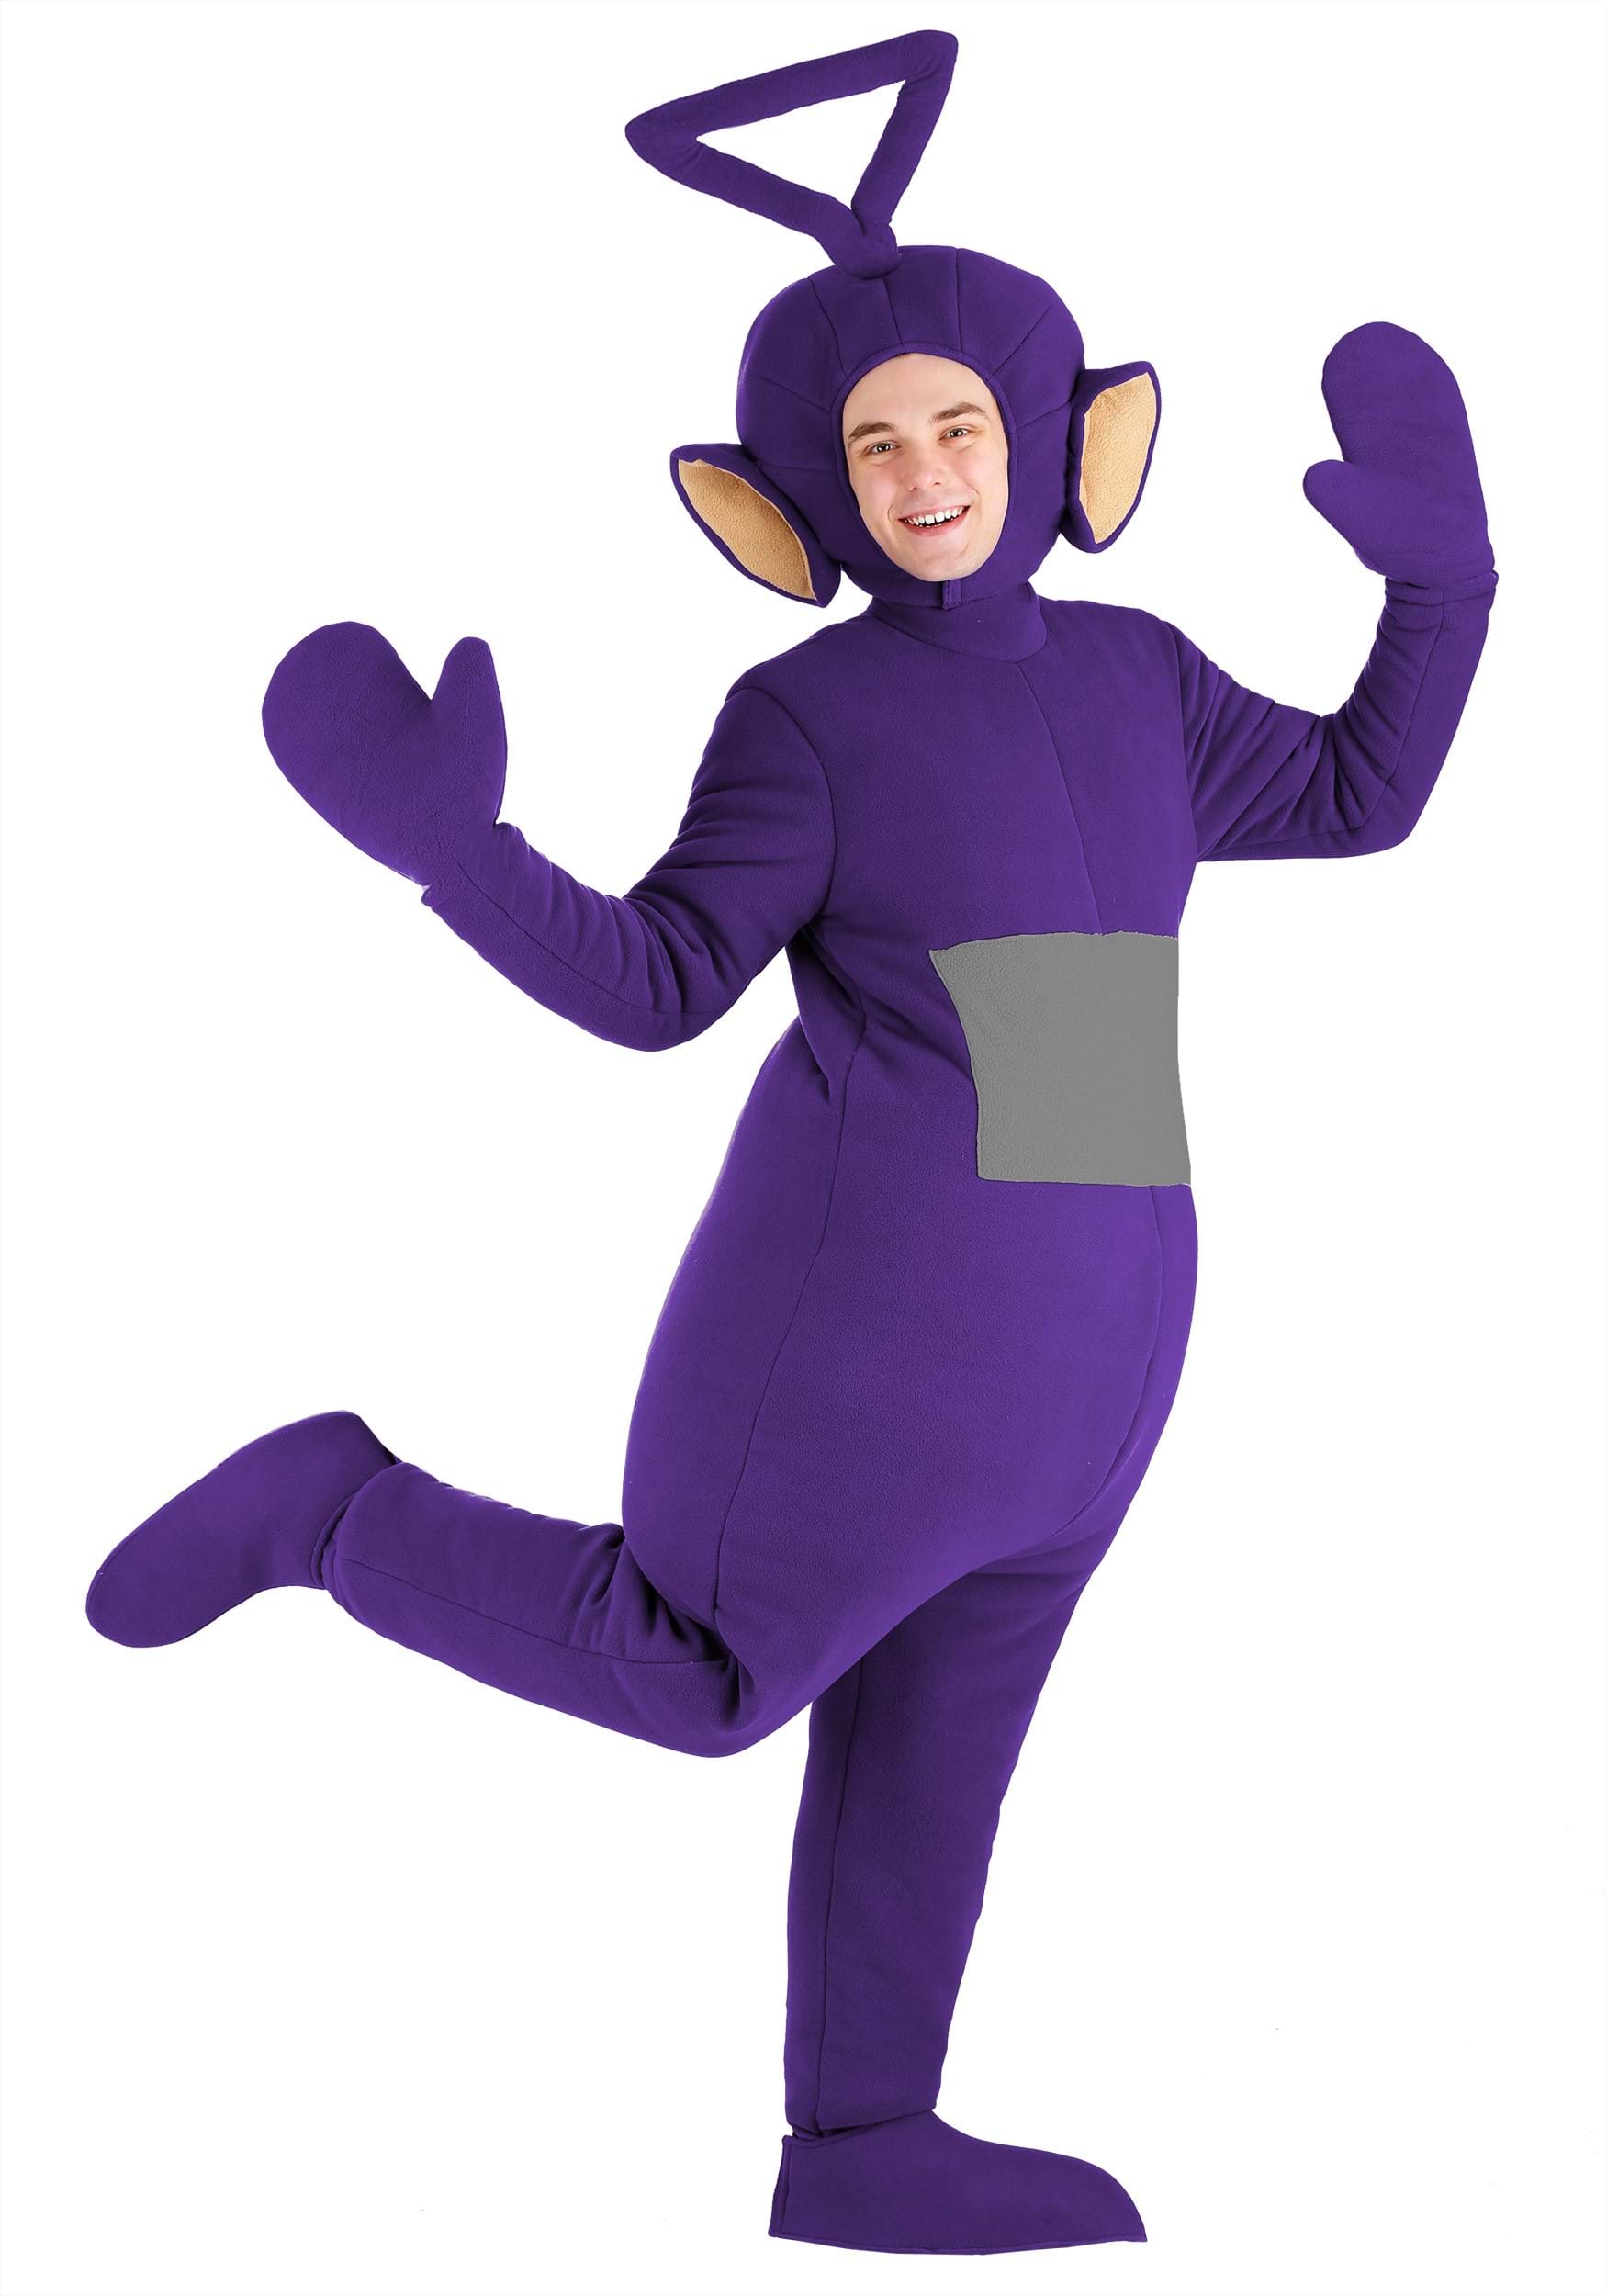 Photos - Fancy Dress FUN Costumes Tinky Winky Teletubbies Costume for Adults Purple/White F